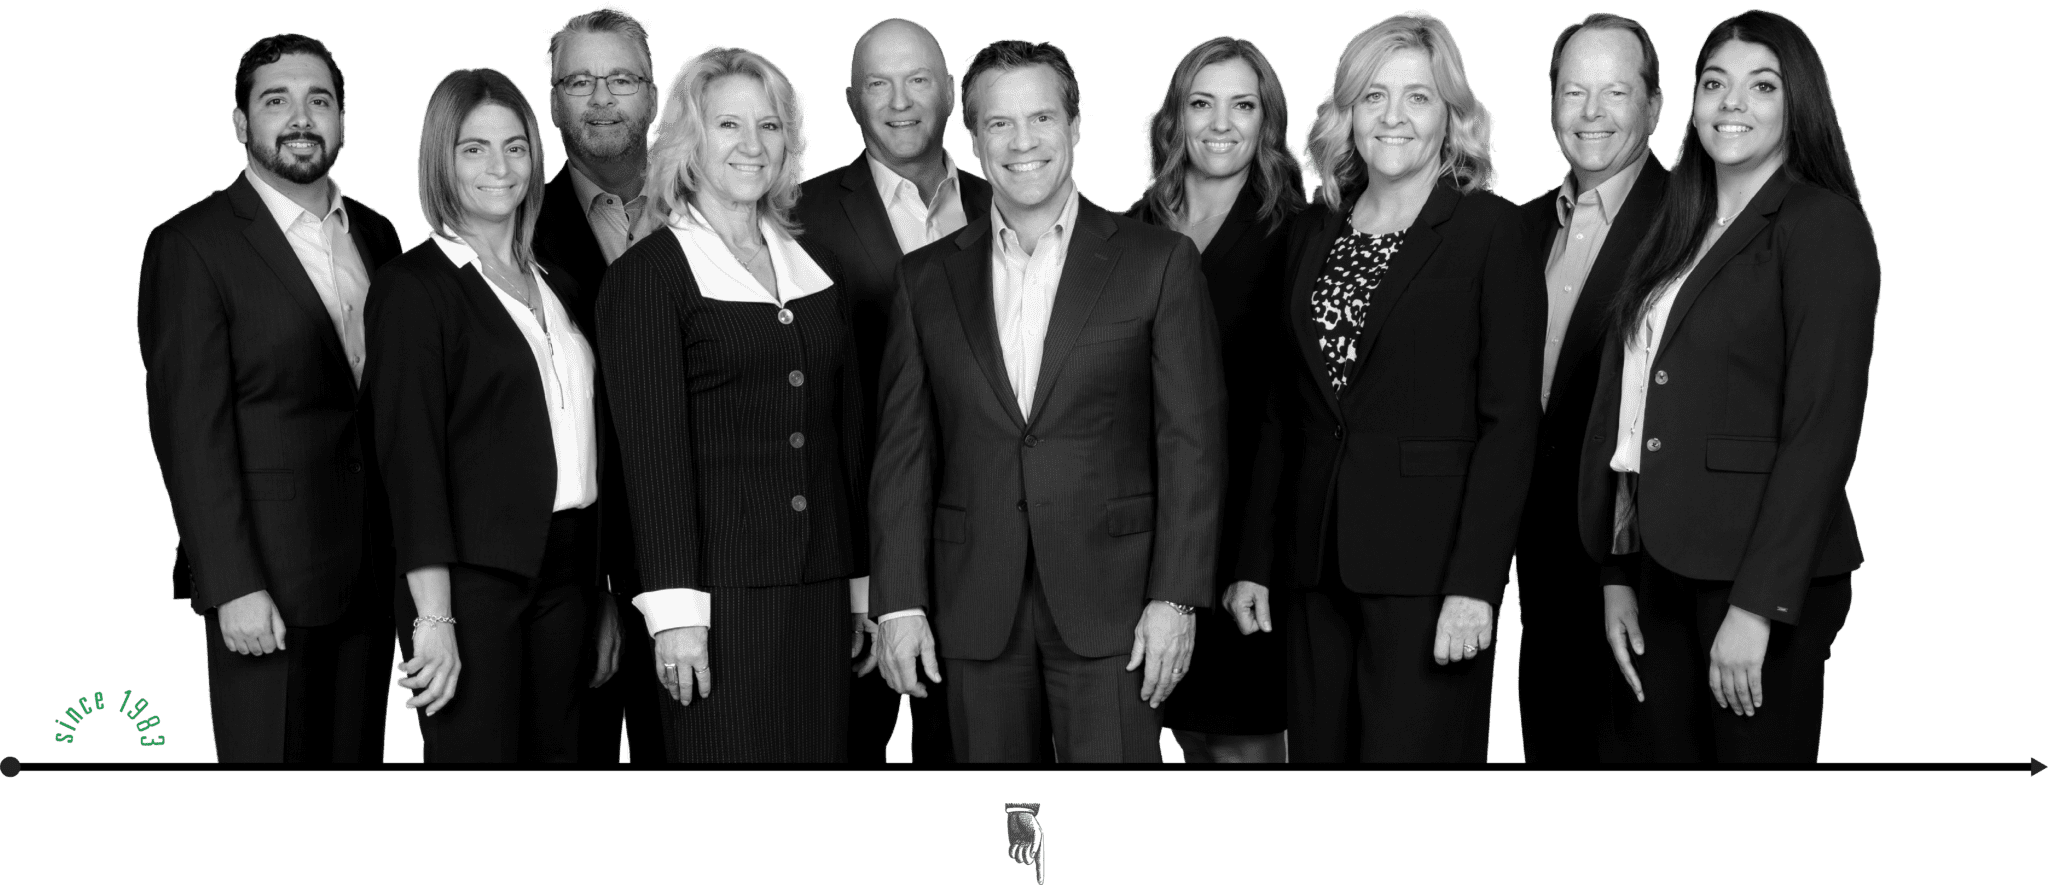 Capital Growth Inc. San Diego's Top Wealth Management Firm Team Photo Shoot